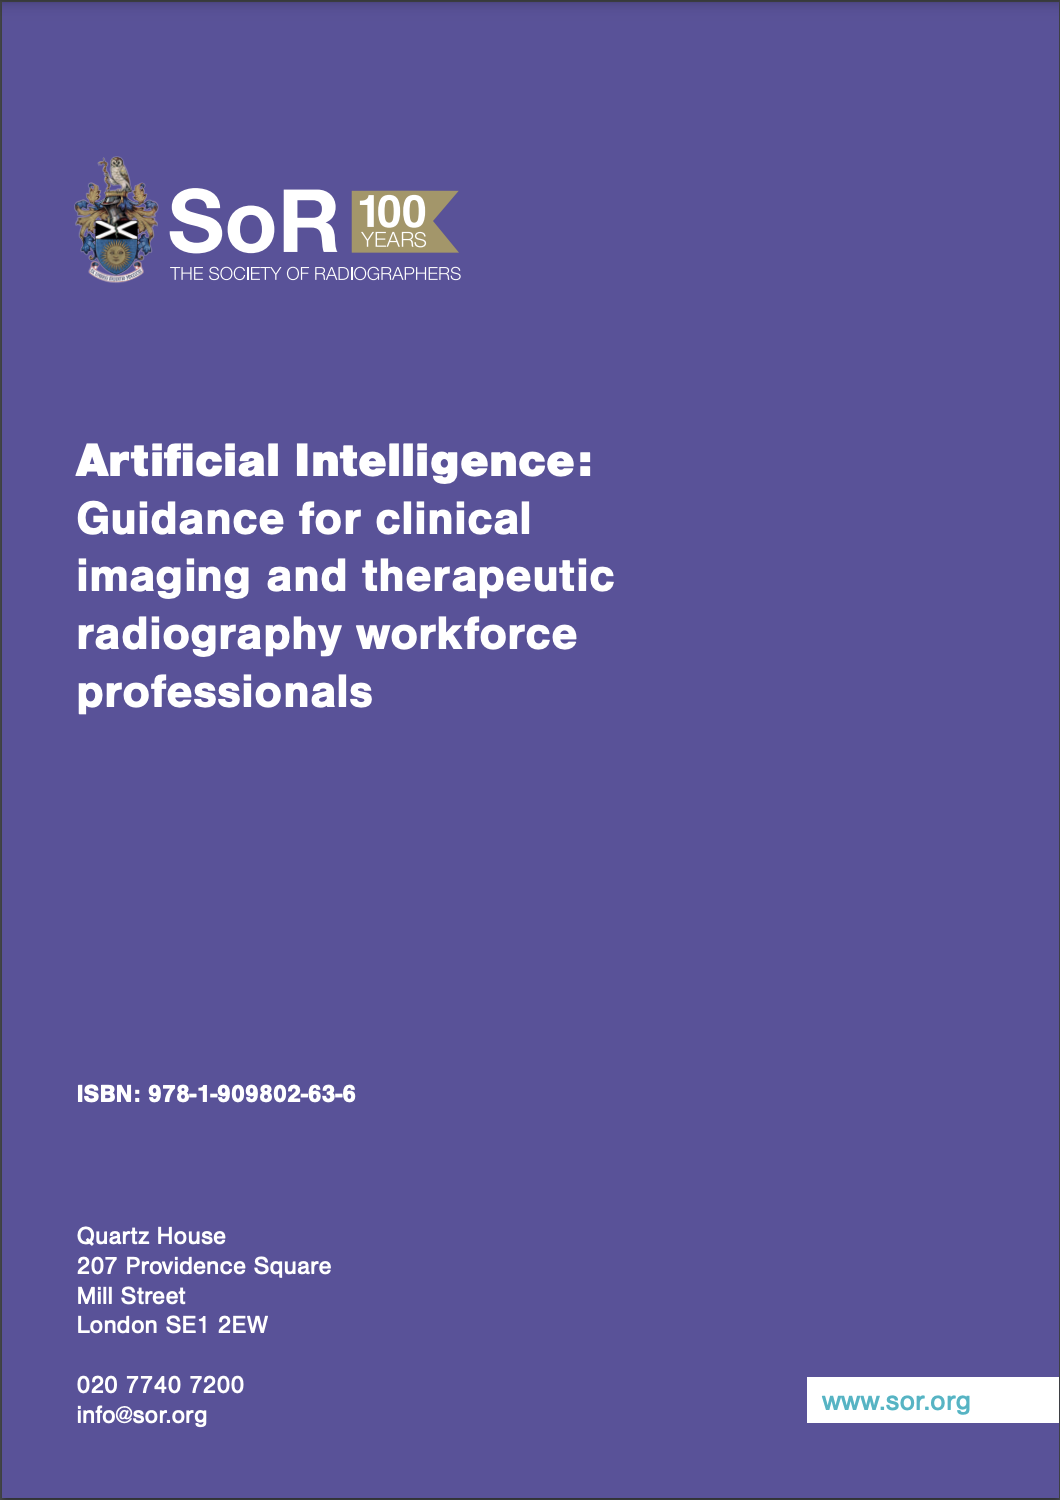 Artificial intelligence: Guidance for clinical imaging and therapeutic radiography workforce professionals